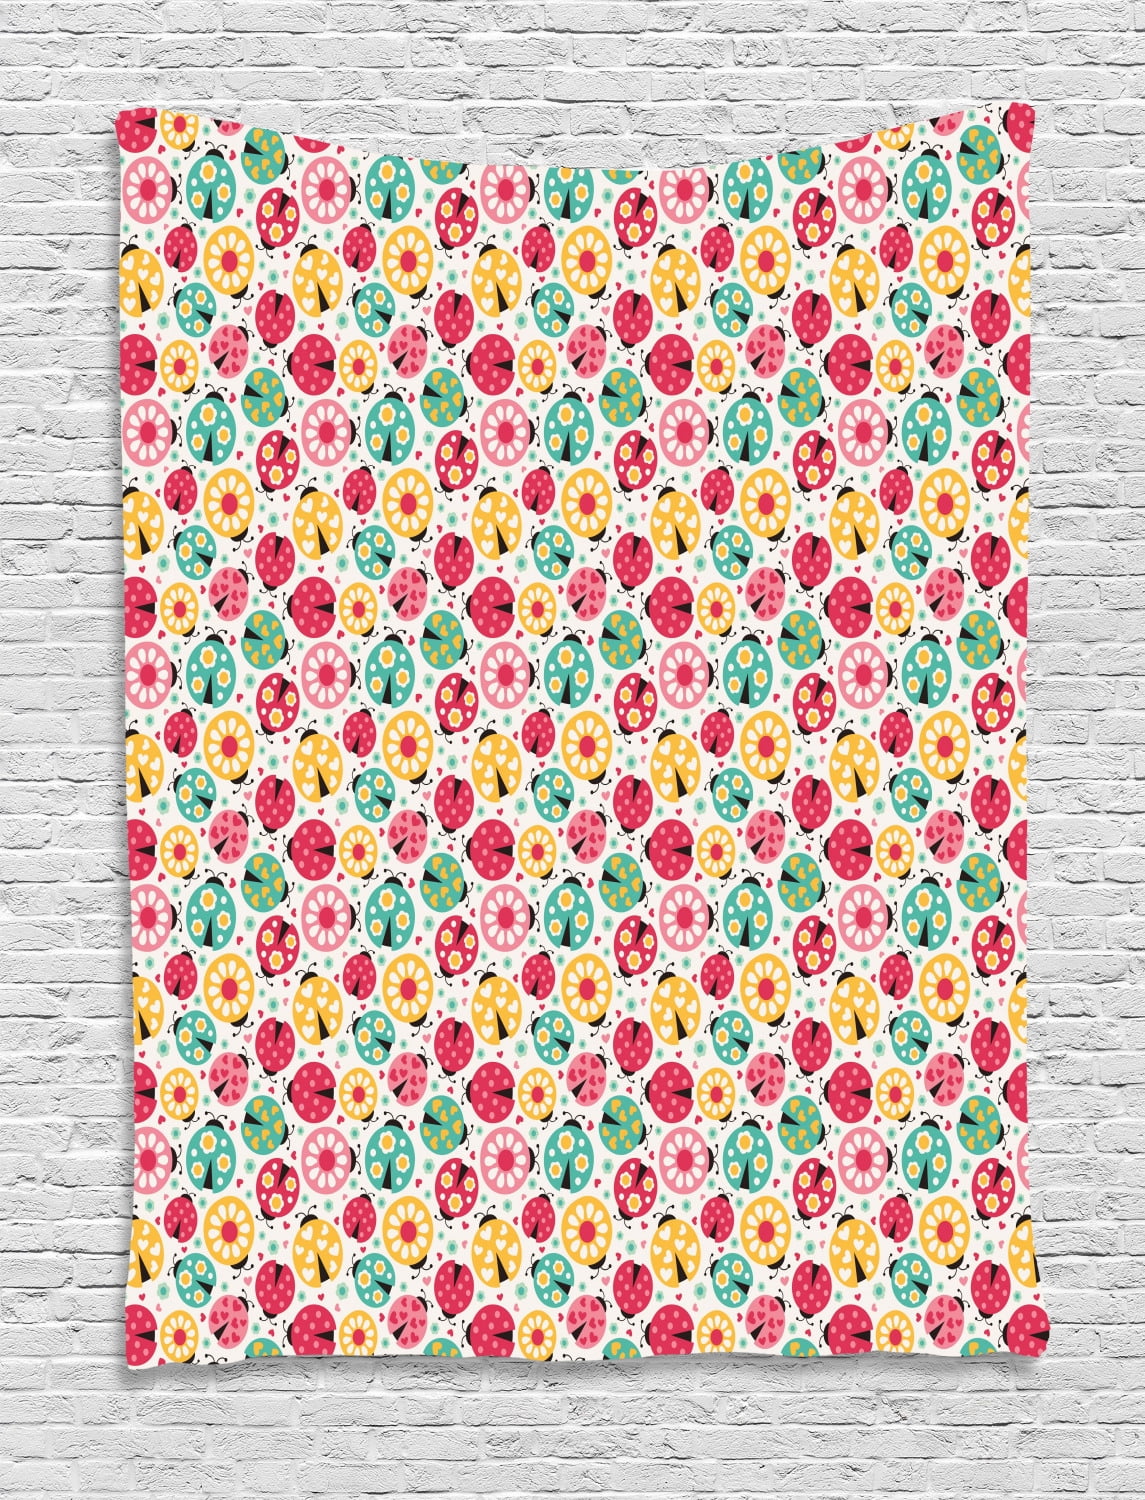 Ladybugs Tapestry, Abstract Bug Pattern with Many Different Designs Hearts Polka Dots Daisies ...